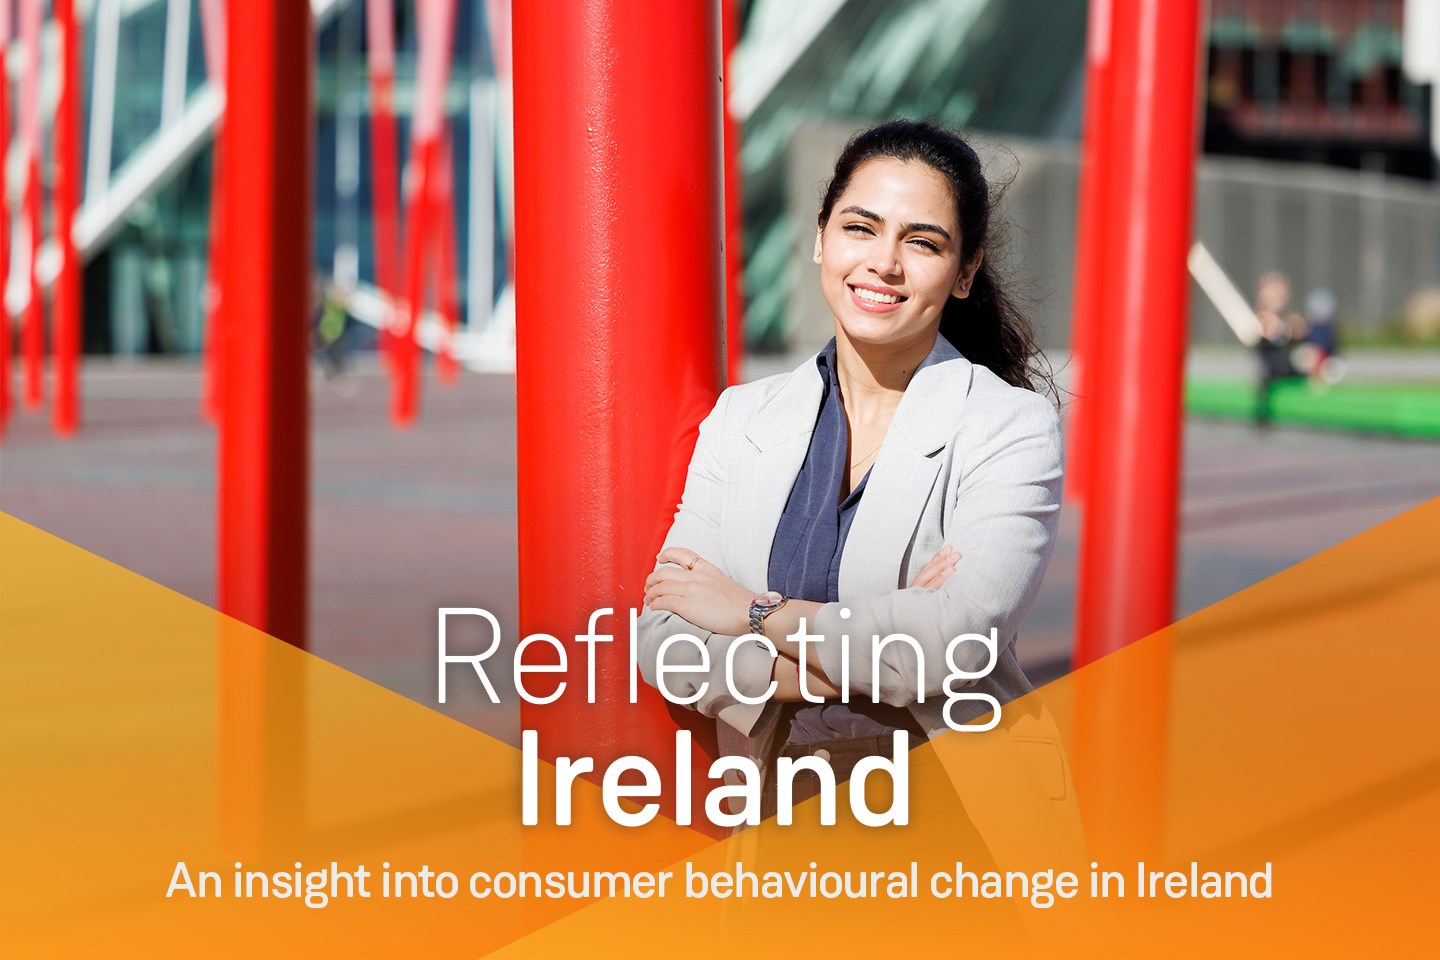 Young woman smiling and standing in front of art installation, text on image ' Reflecting Ireland, An insight into consumer behavioural change in Ireland